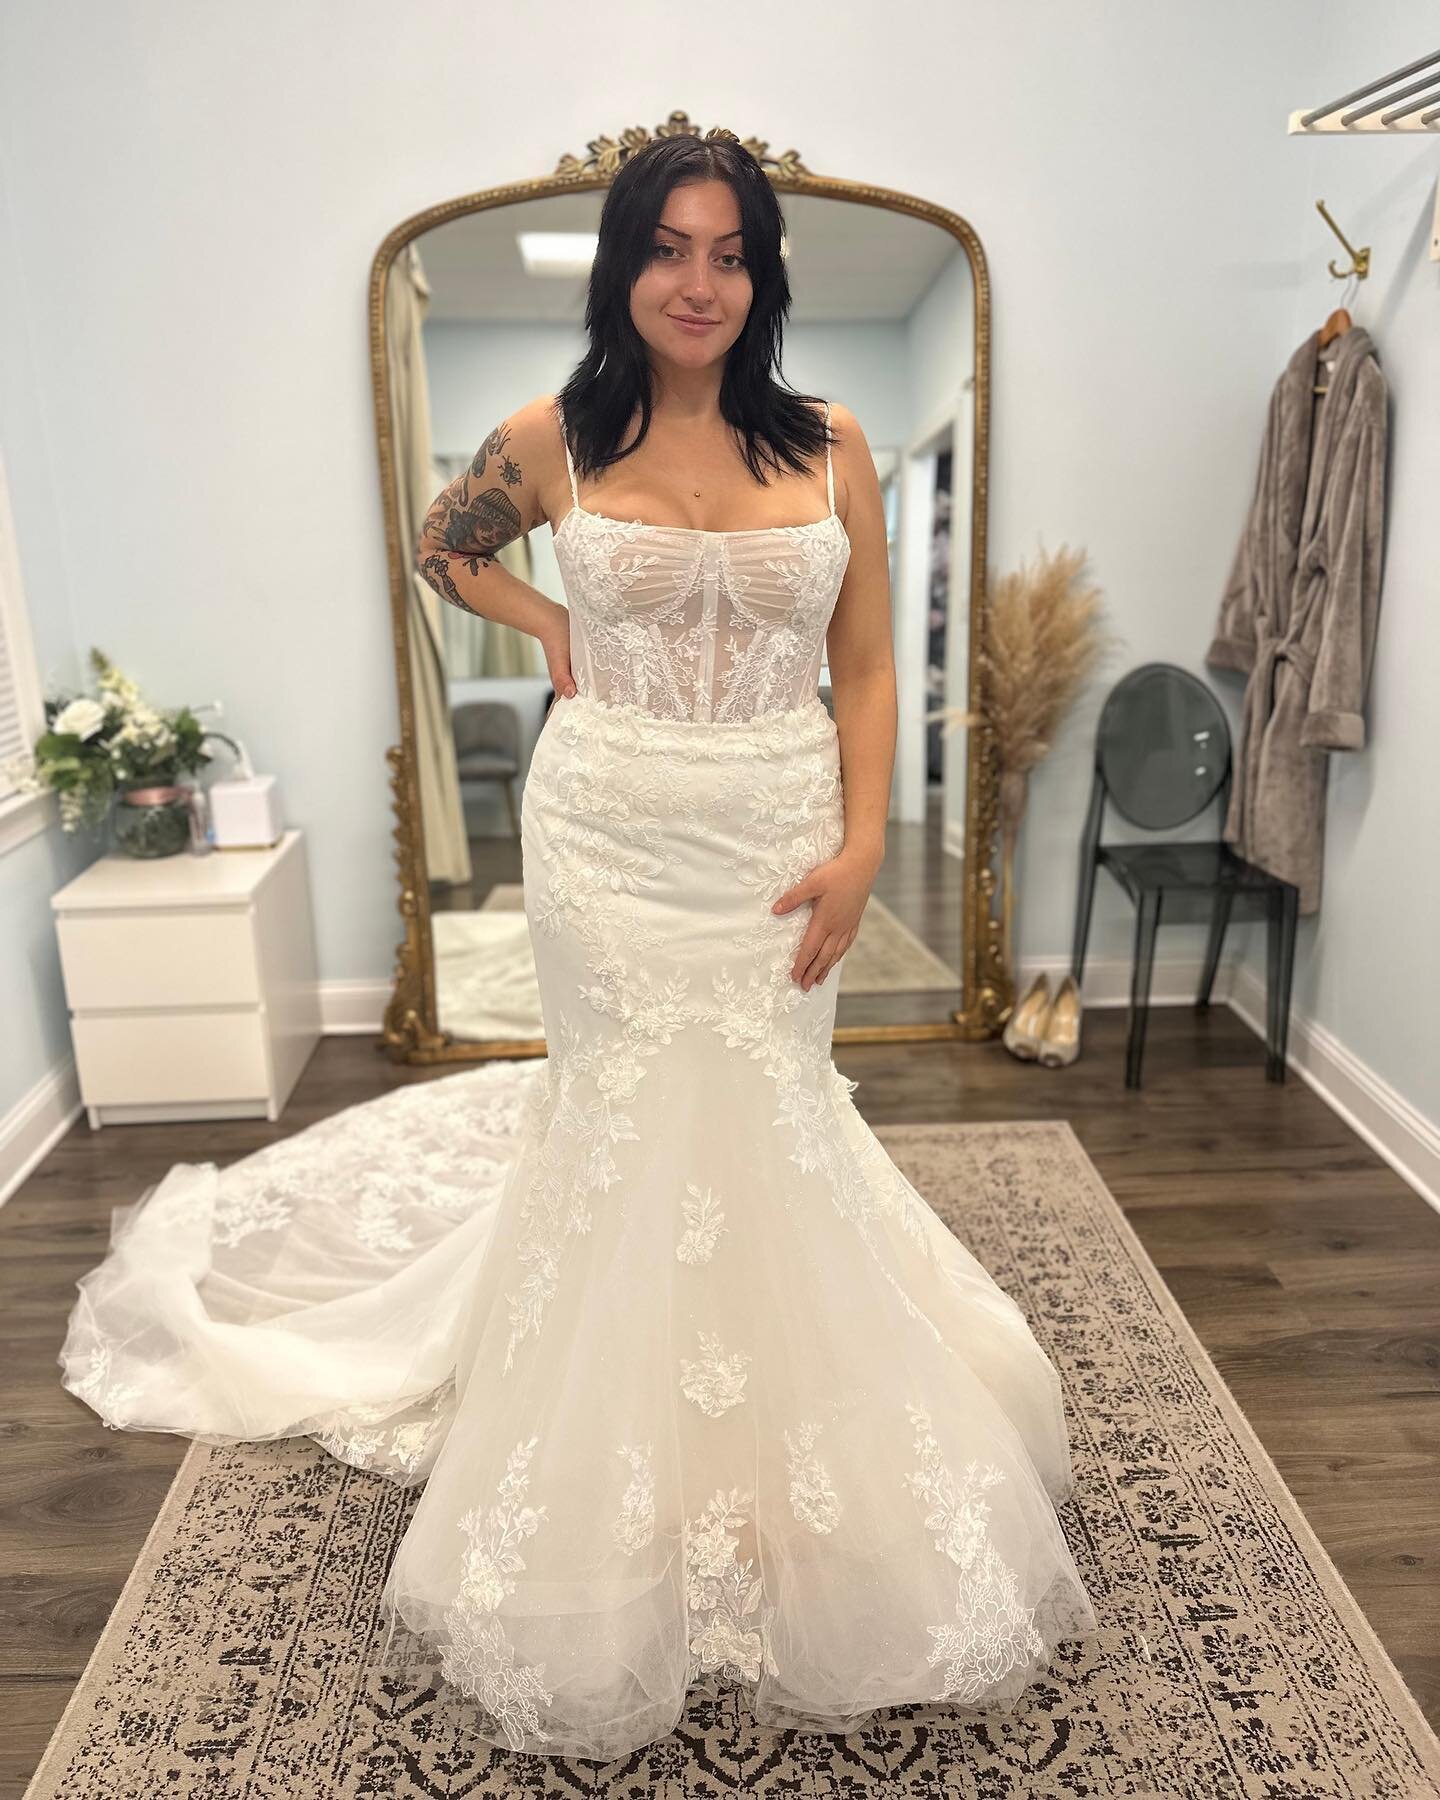 Talk about a stunner! ❤️&zwj;🔥 Introducing style #1488 by @martinalianabridal ✨ available in lace up or zip up back closure
#BSBbride #martinaliana #njbride